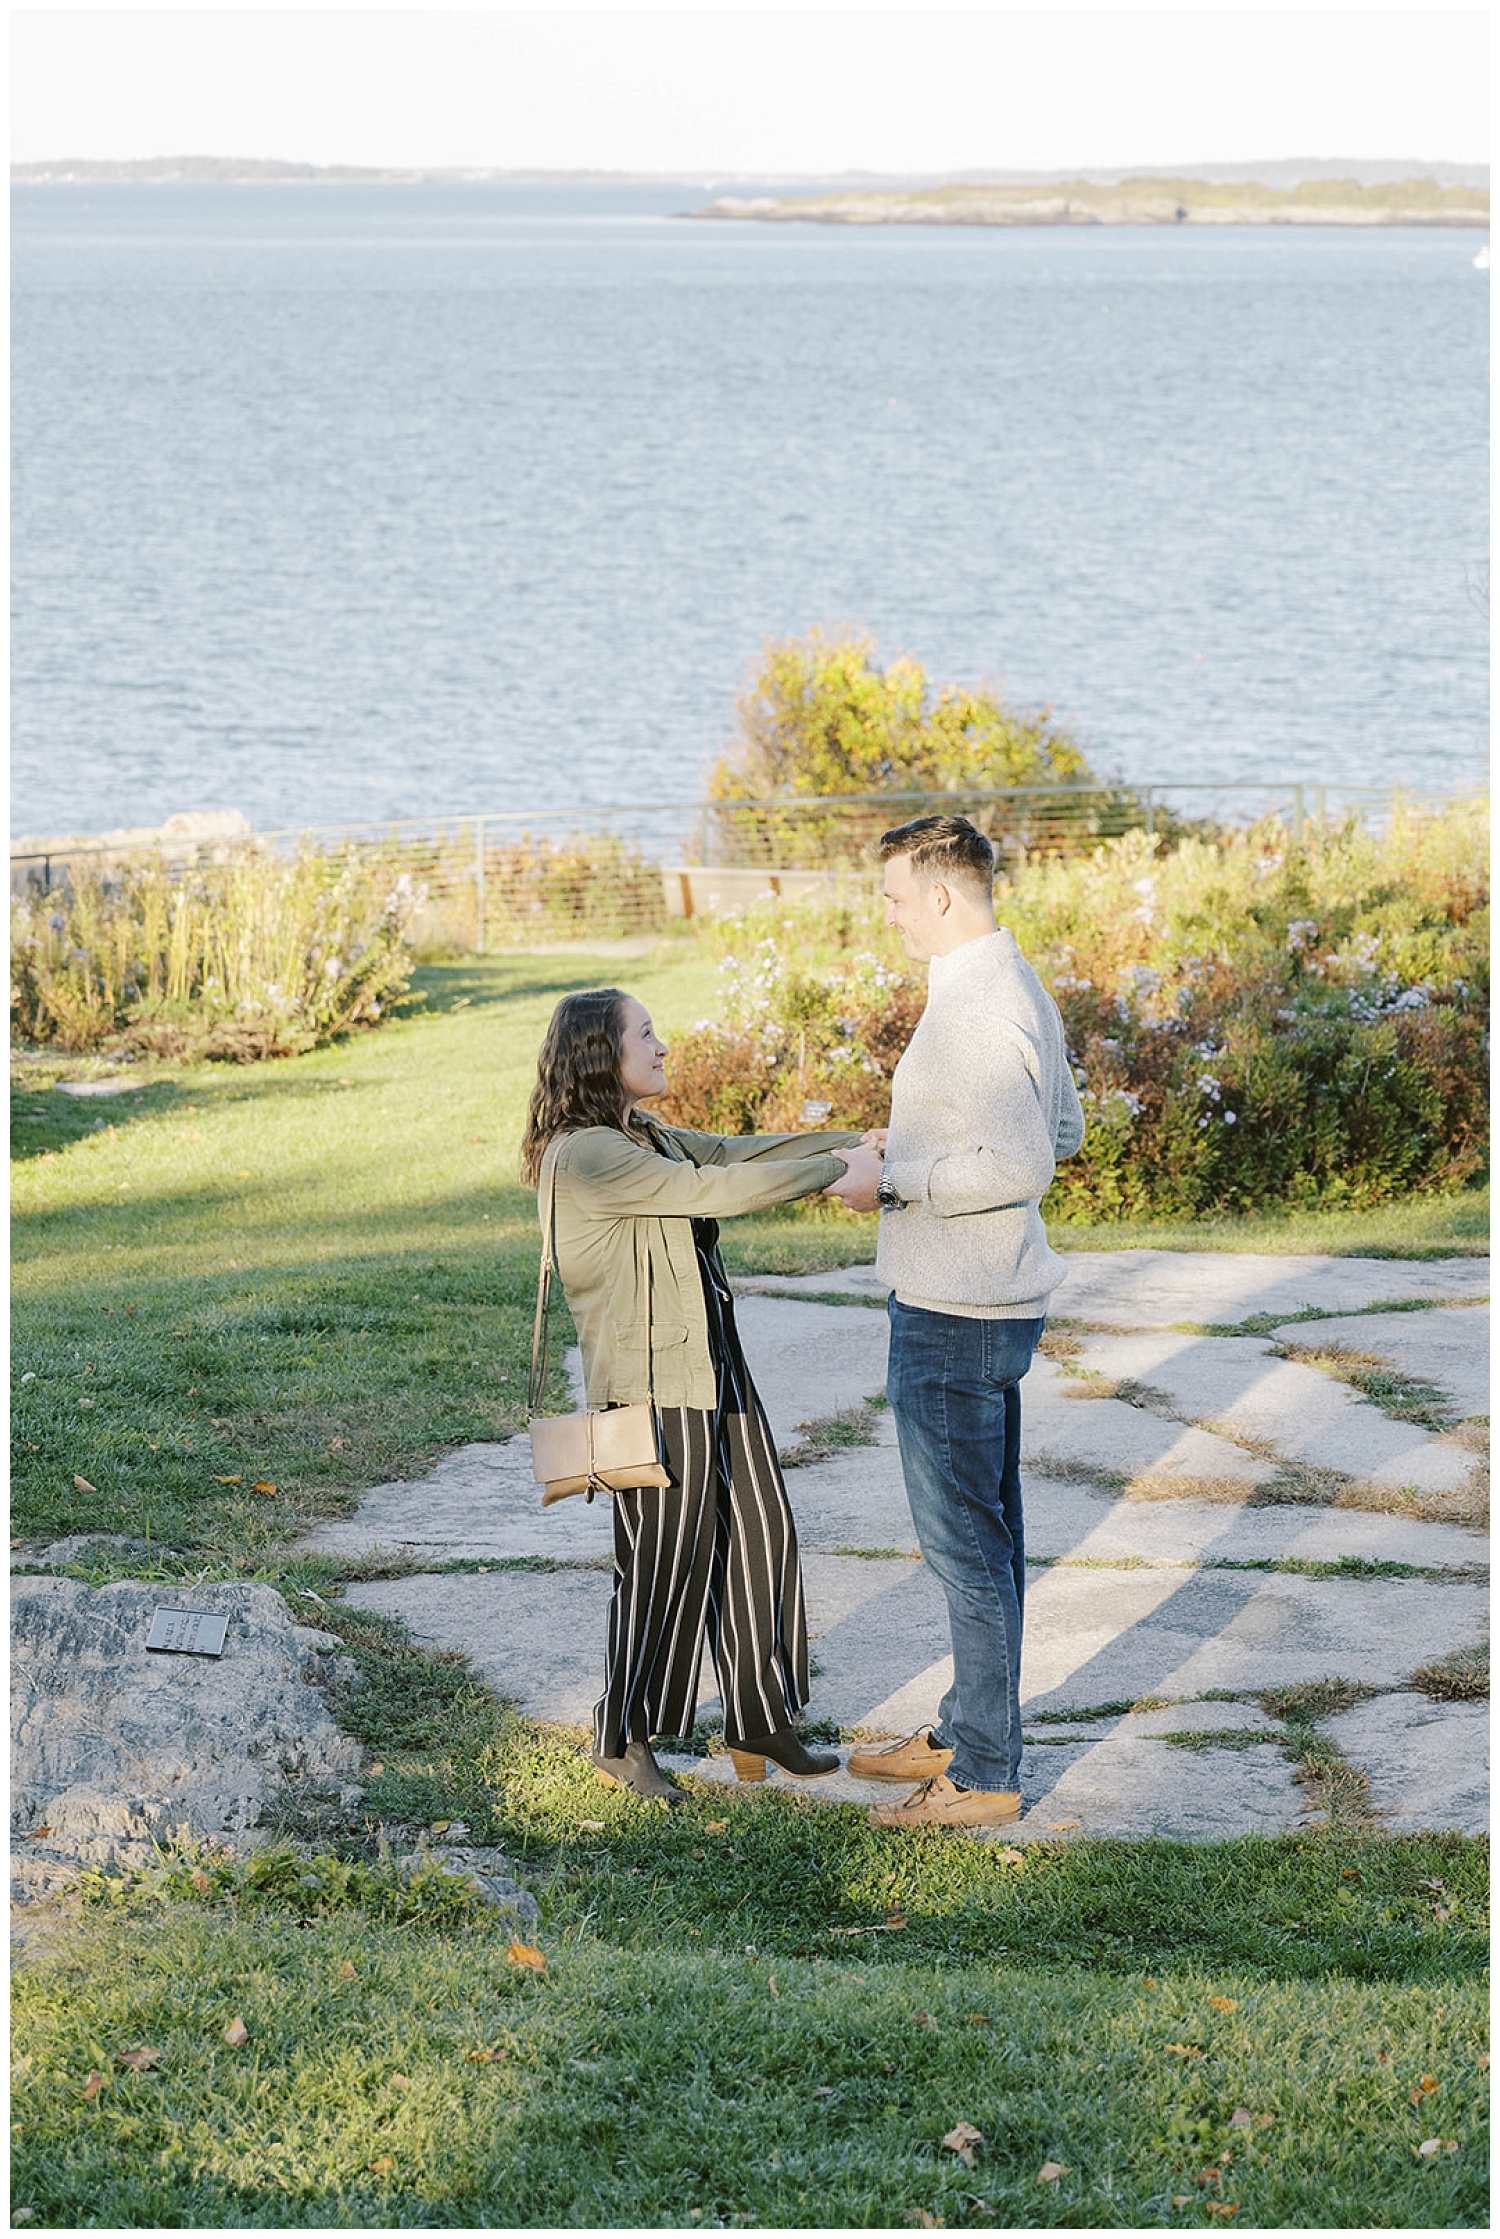 Maine engagement photographer shooting a proposal at Fort Williams Park